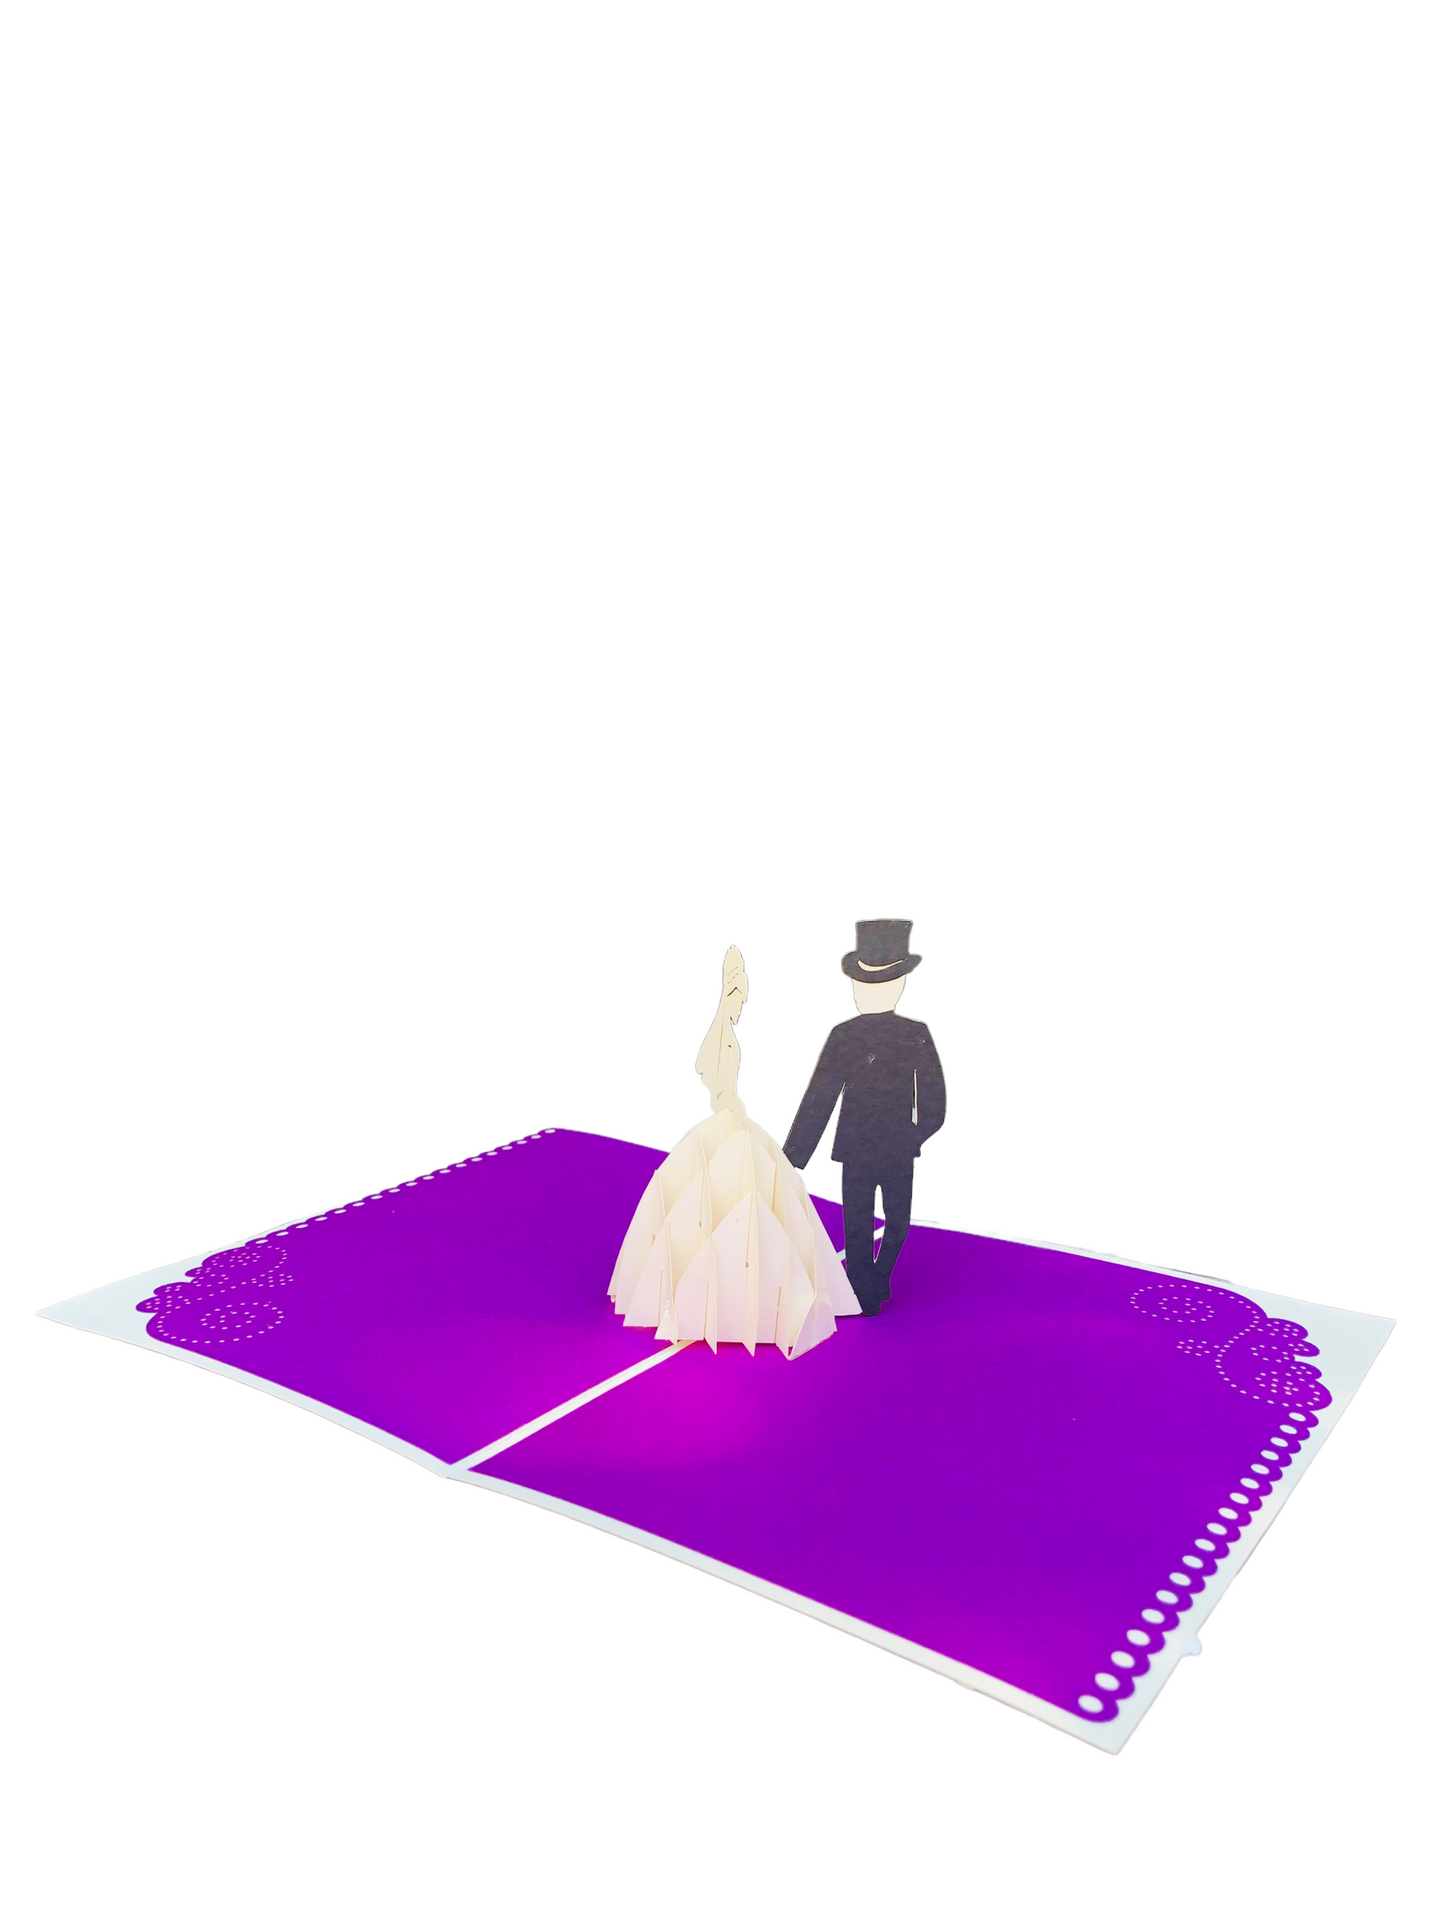 Married Couple Pop Up Cards